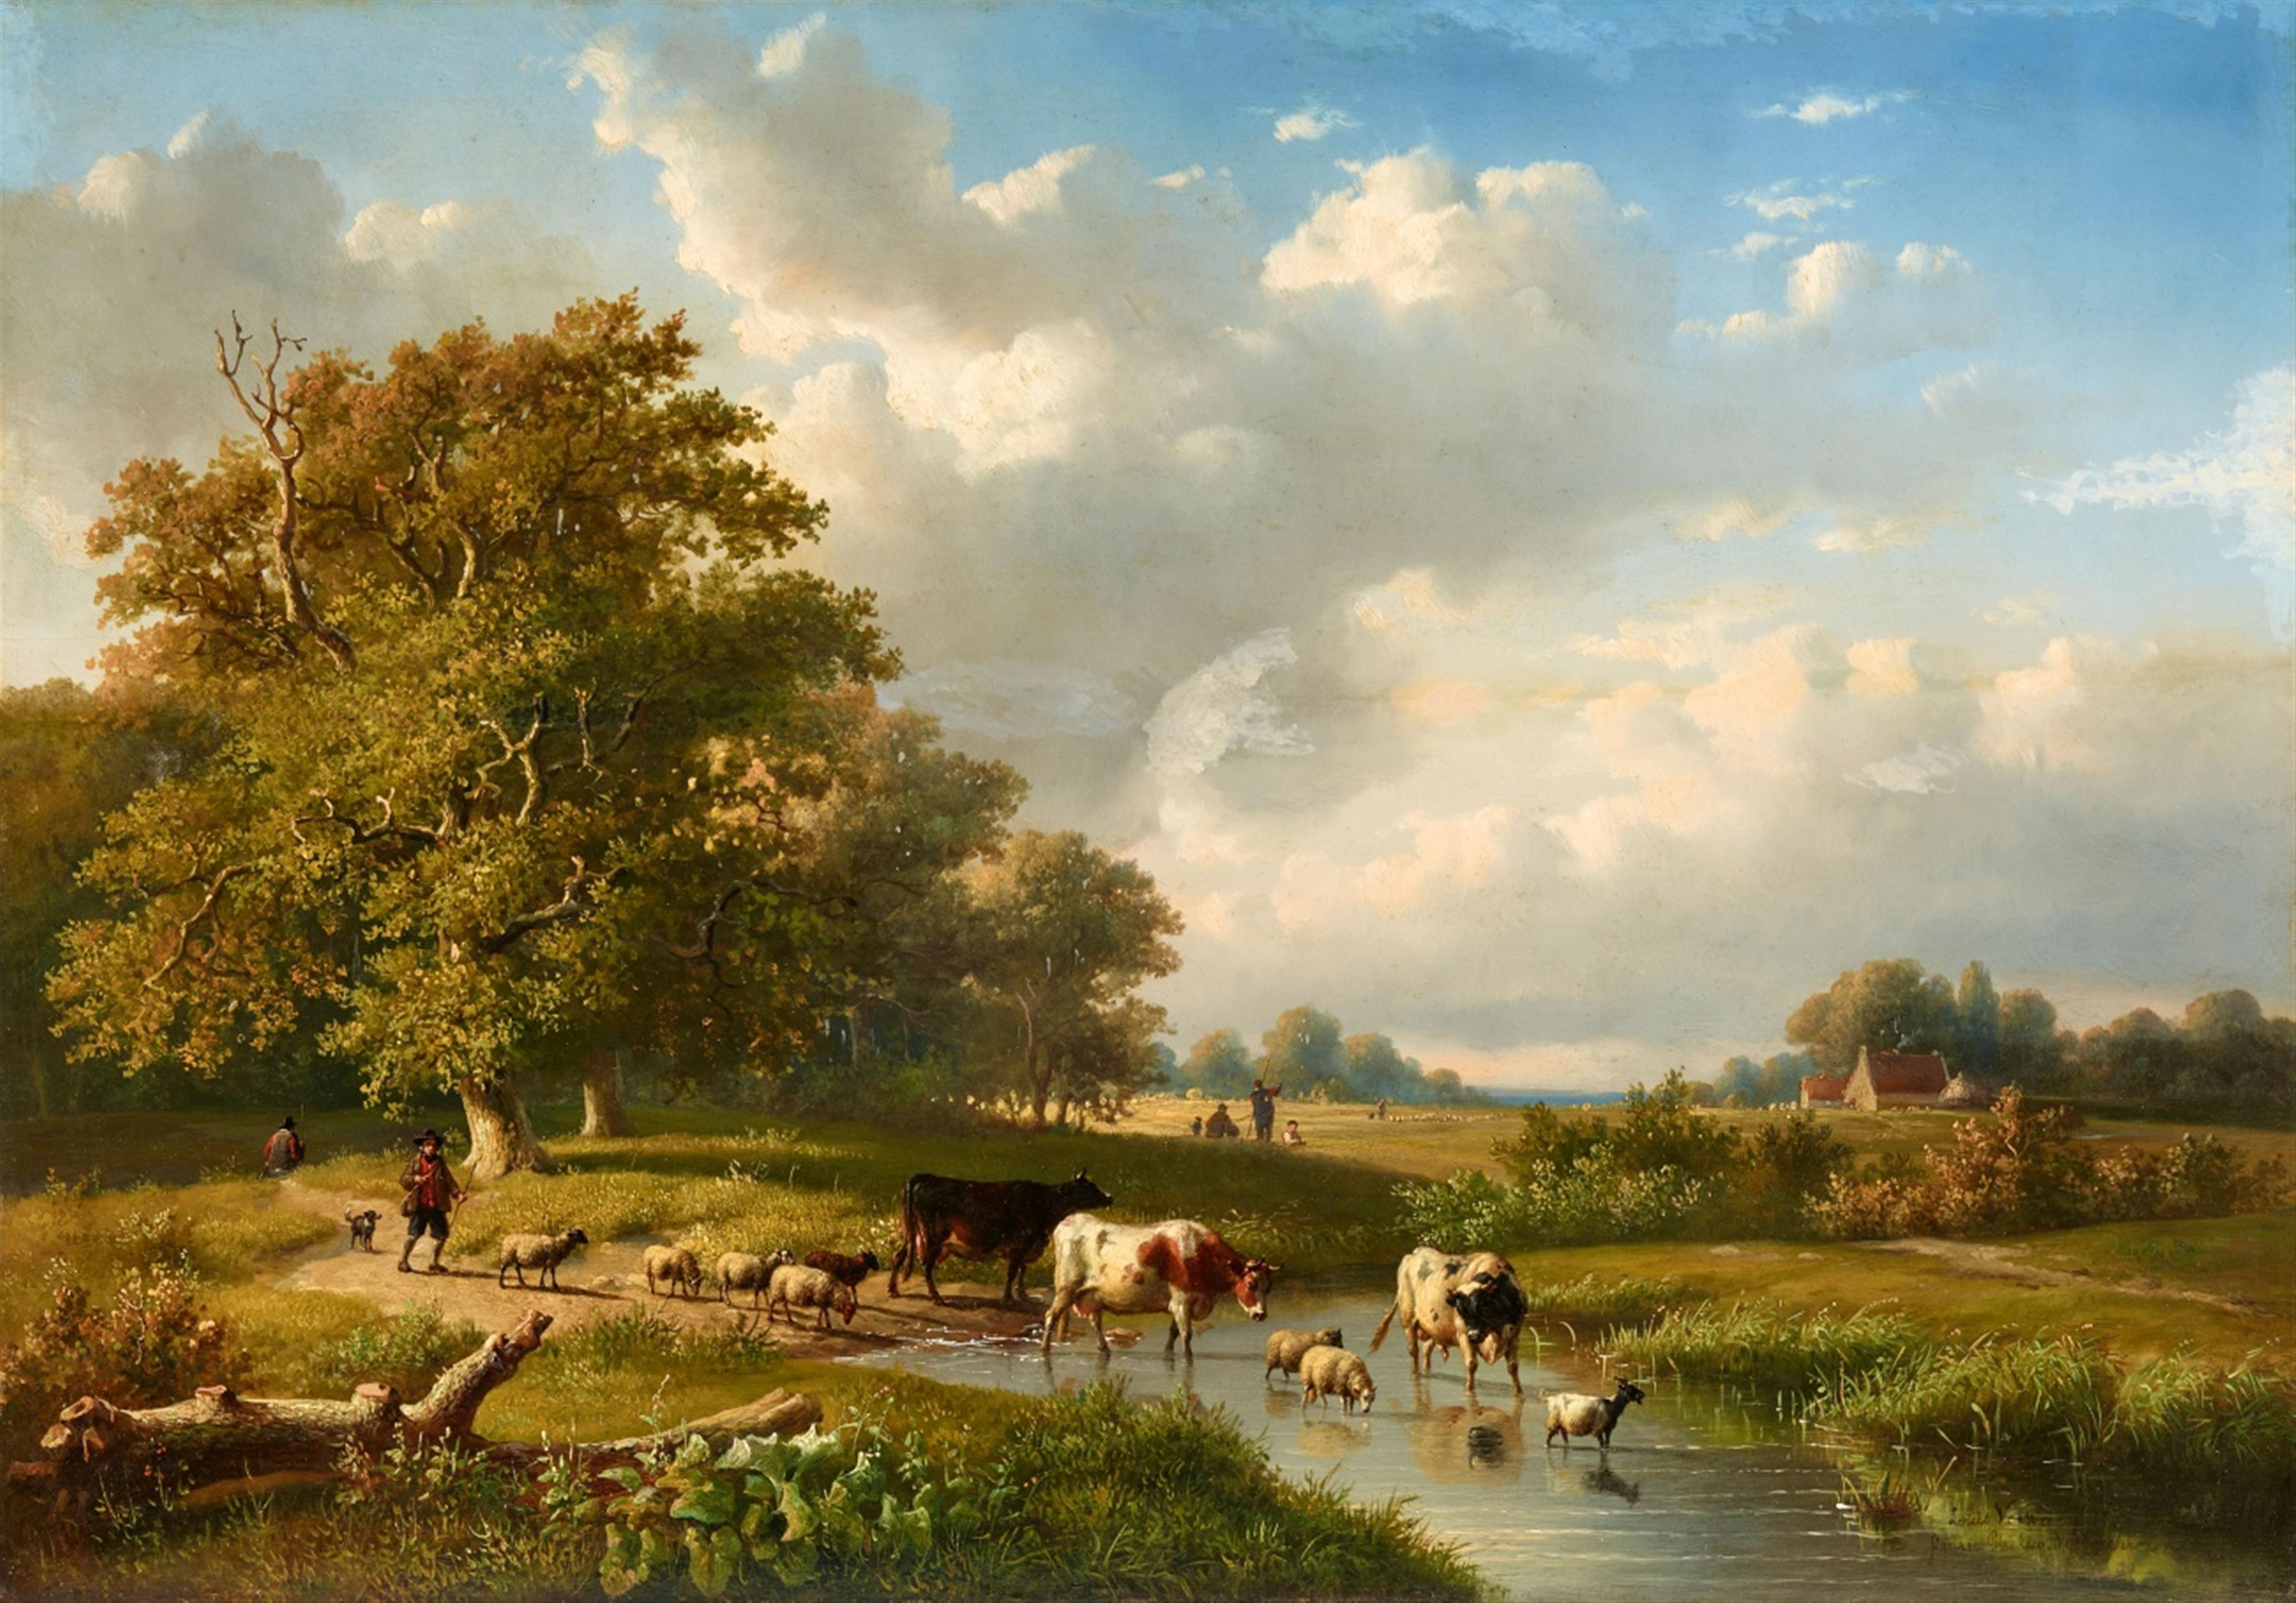 Eugène-Joseph Verboeckhoven
Louis Pierre Verwée - A Shepherd with Cows, Sheep, and Goats by a Lake - image-1